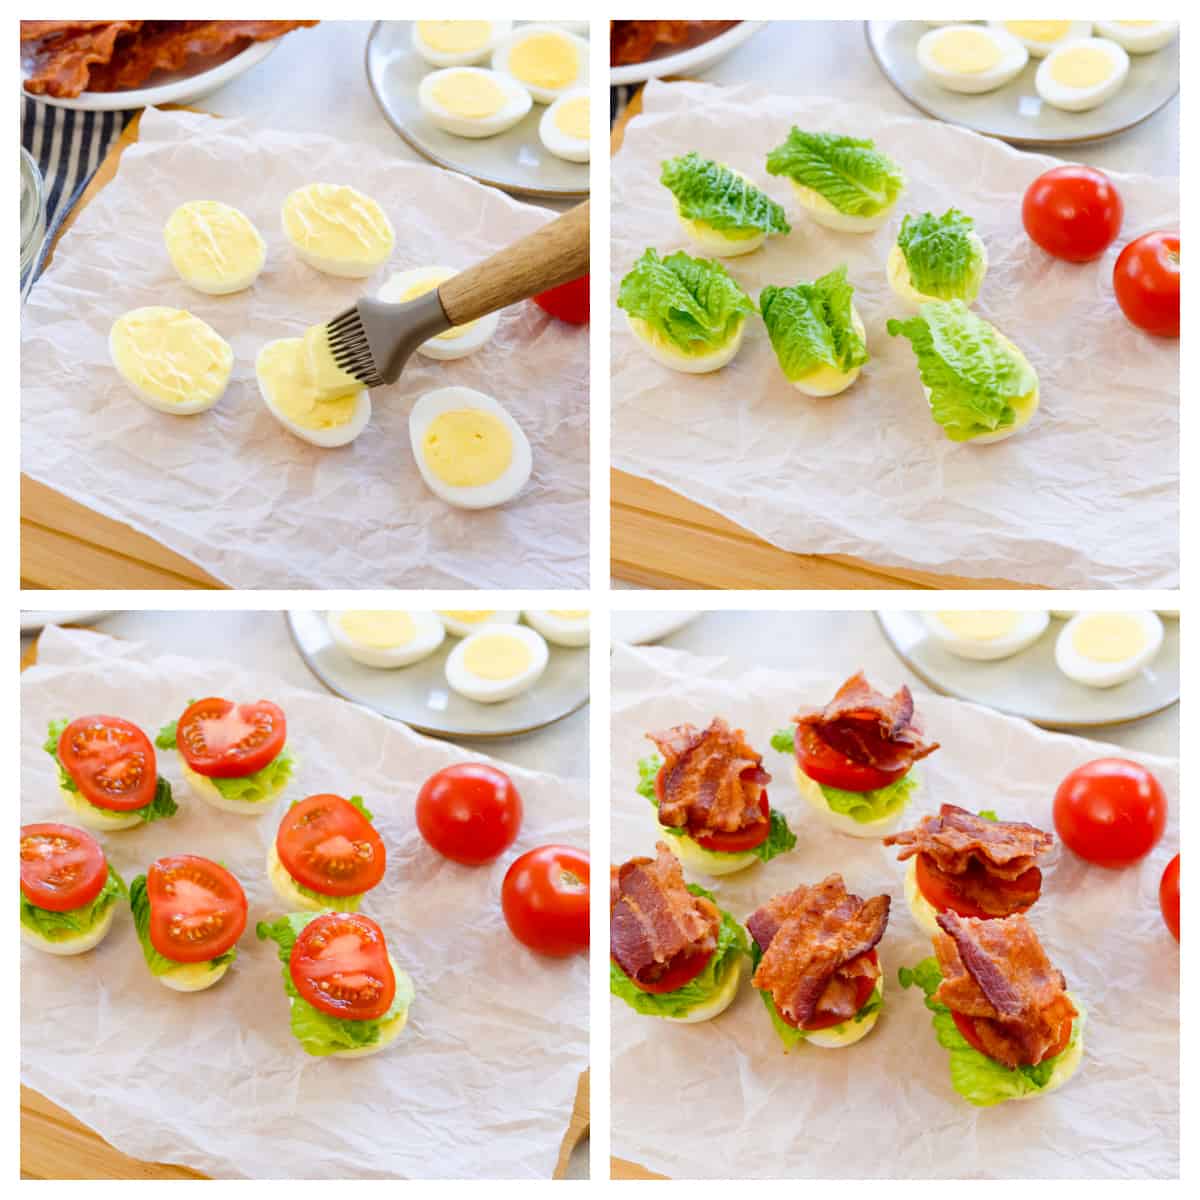 Collage showing how to make BLT boiled eggs.